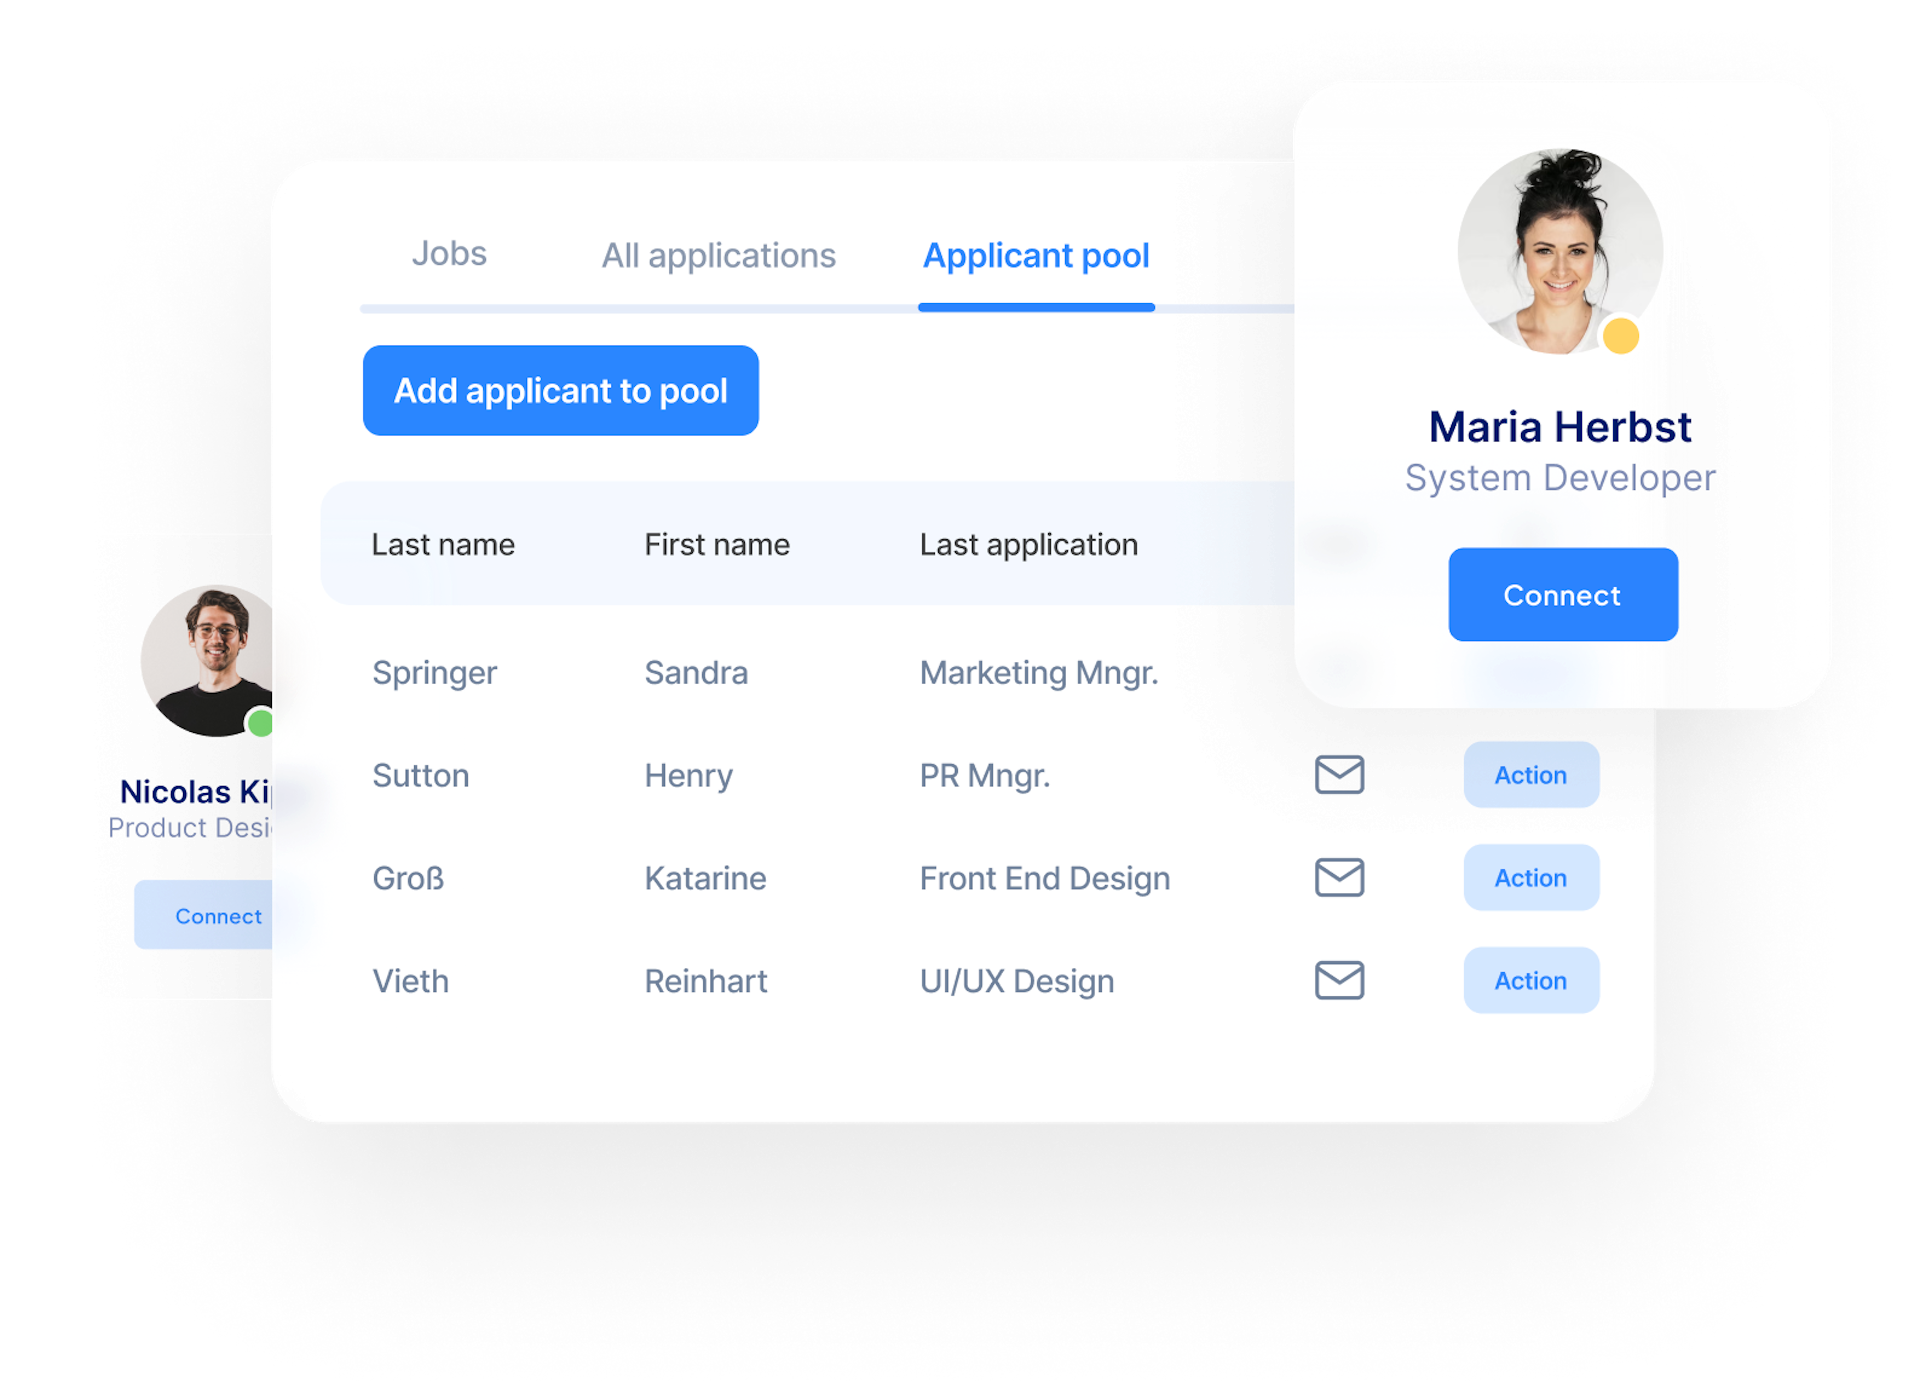 Professional applicant management from advertisement to onboarding